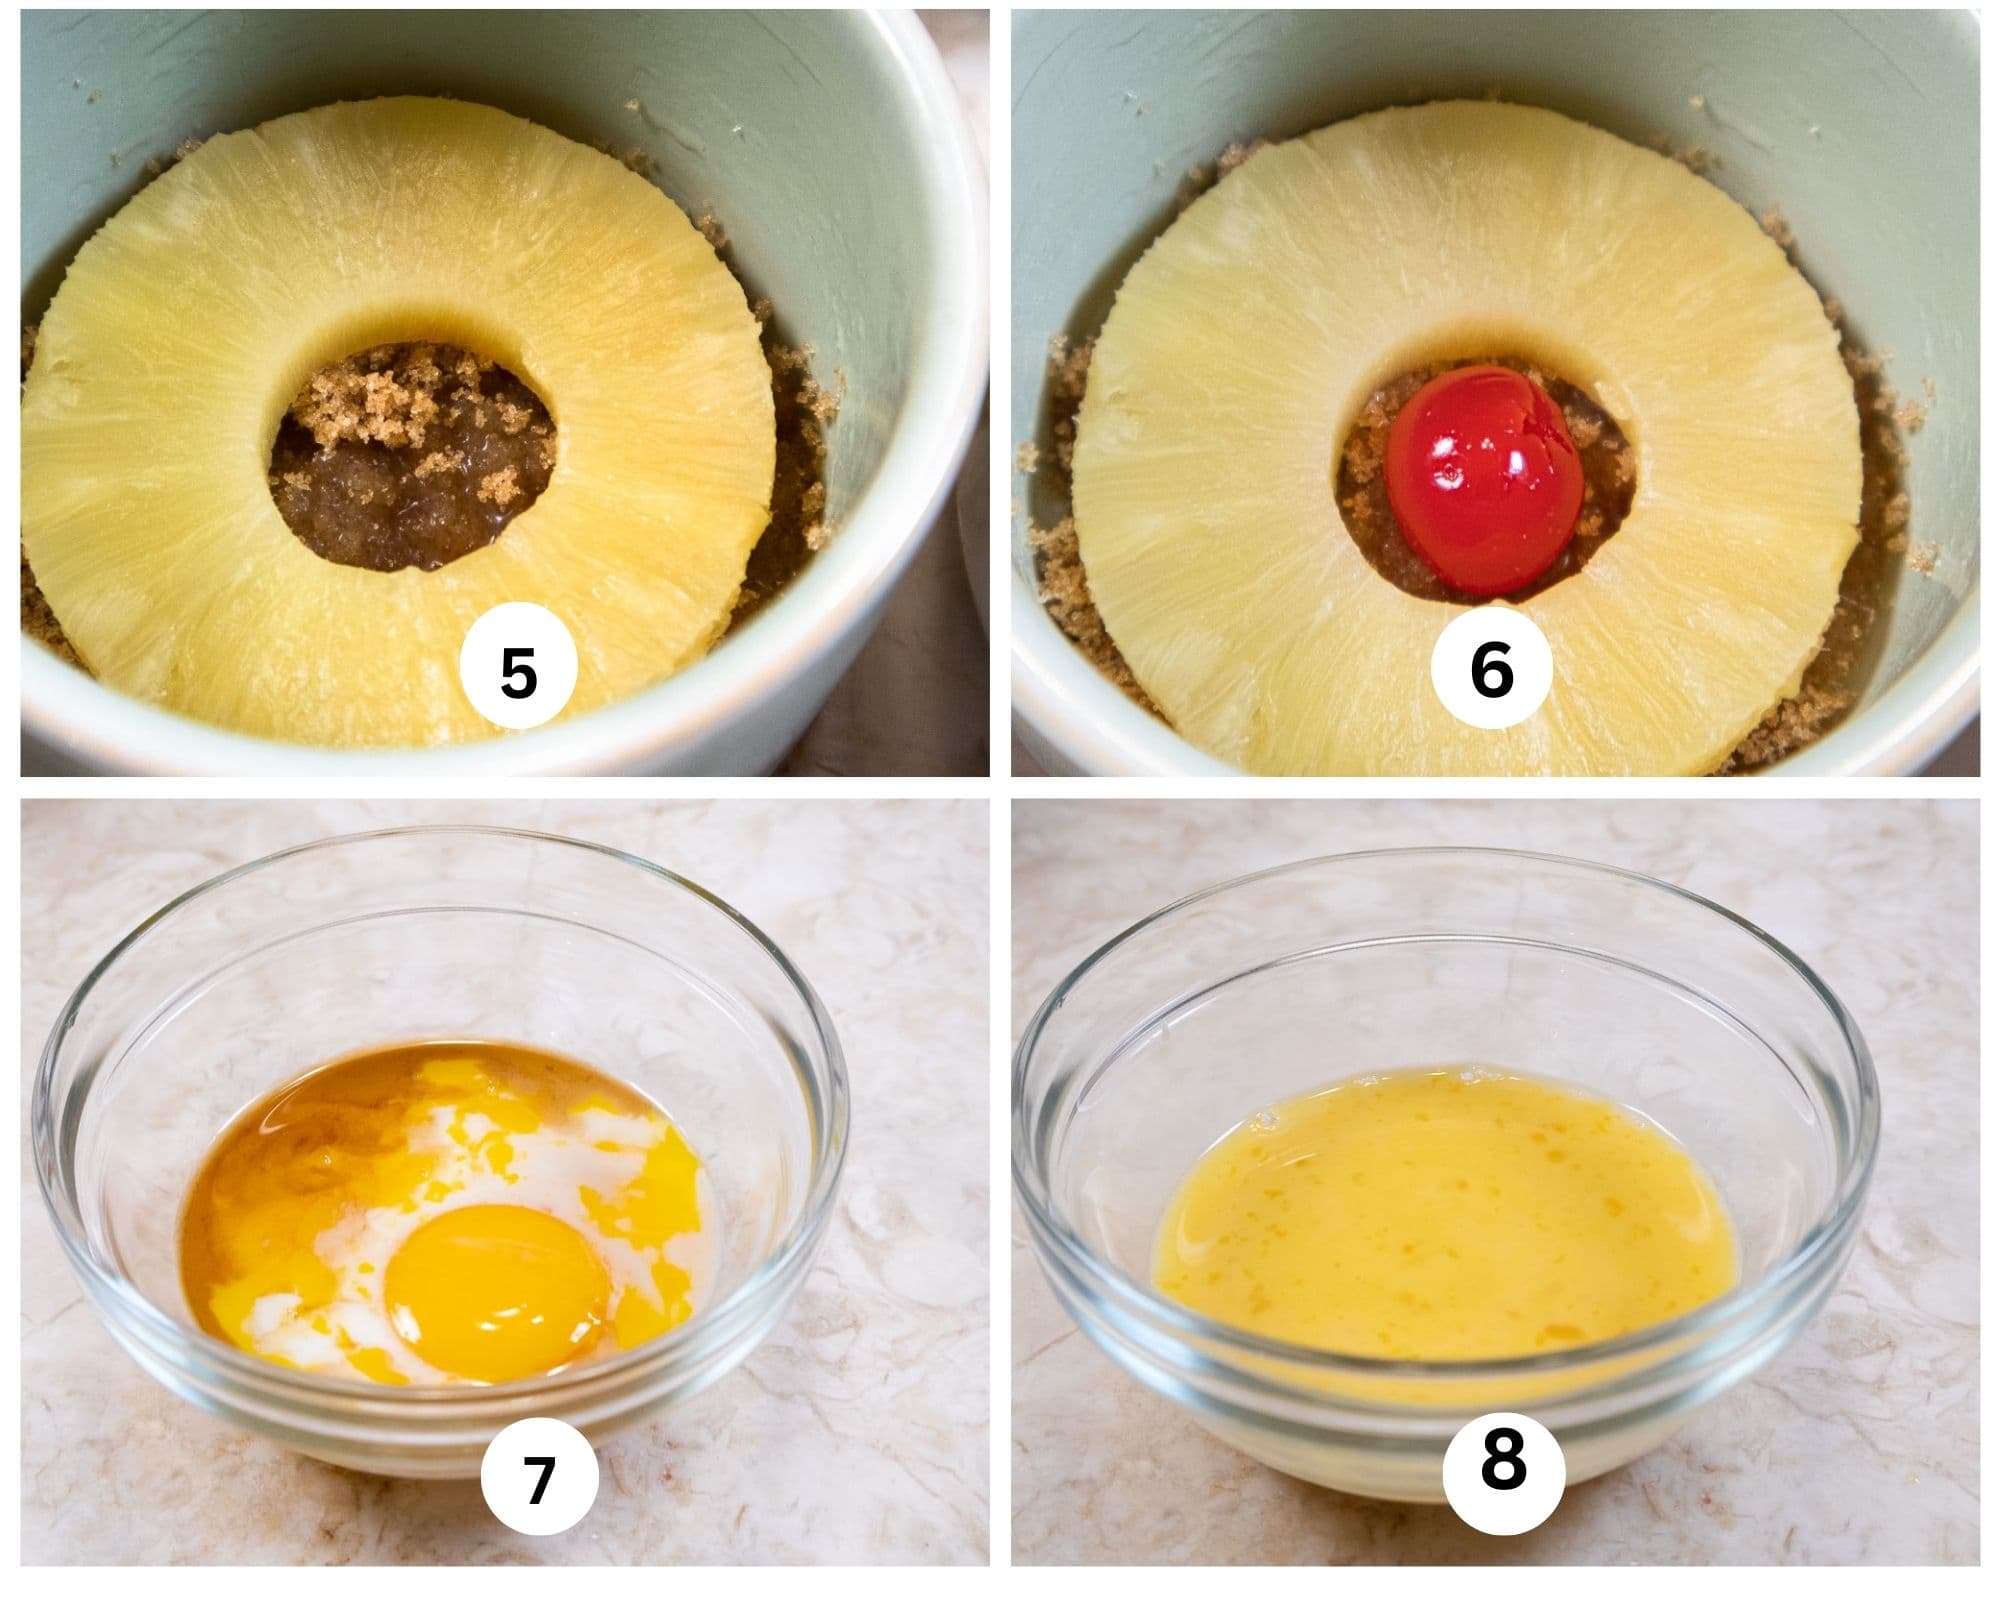 The second collage shows the pineapple over the brown sugar, the cherry in the pineapple, the liquids in a bowl and the liquids mixed.